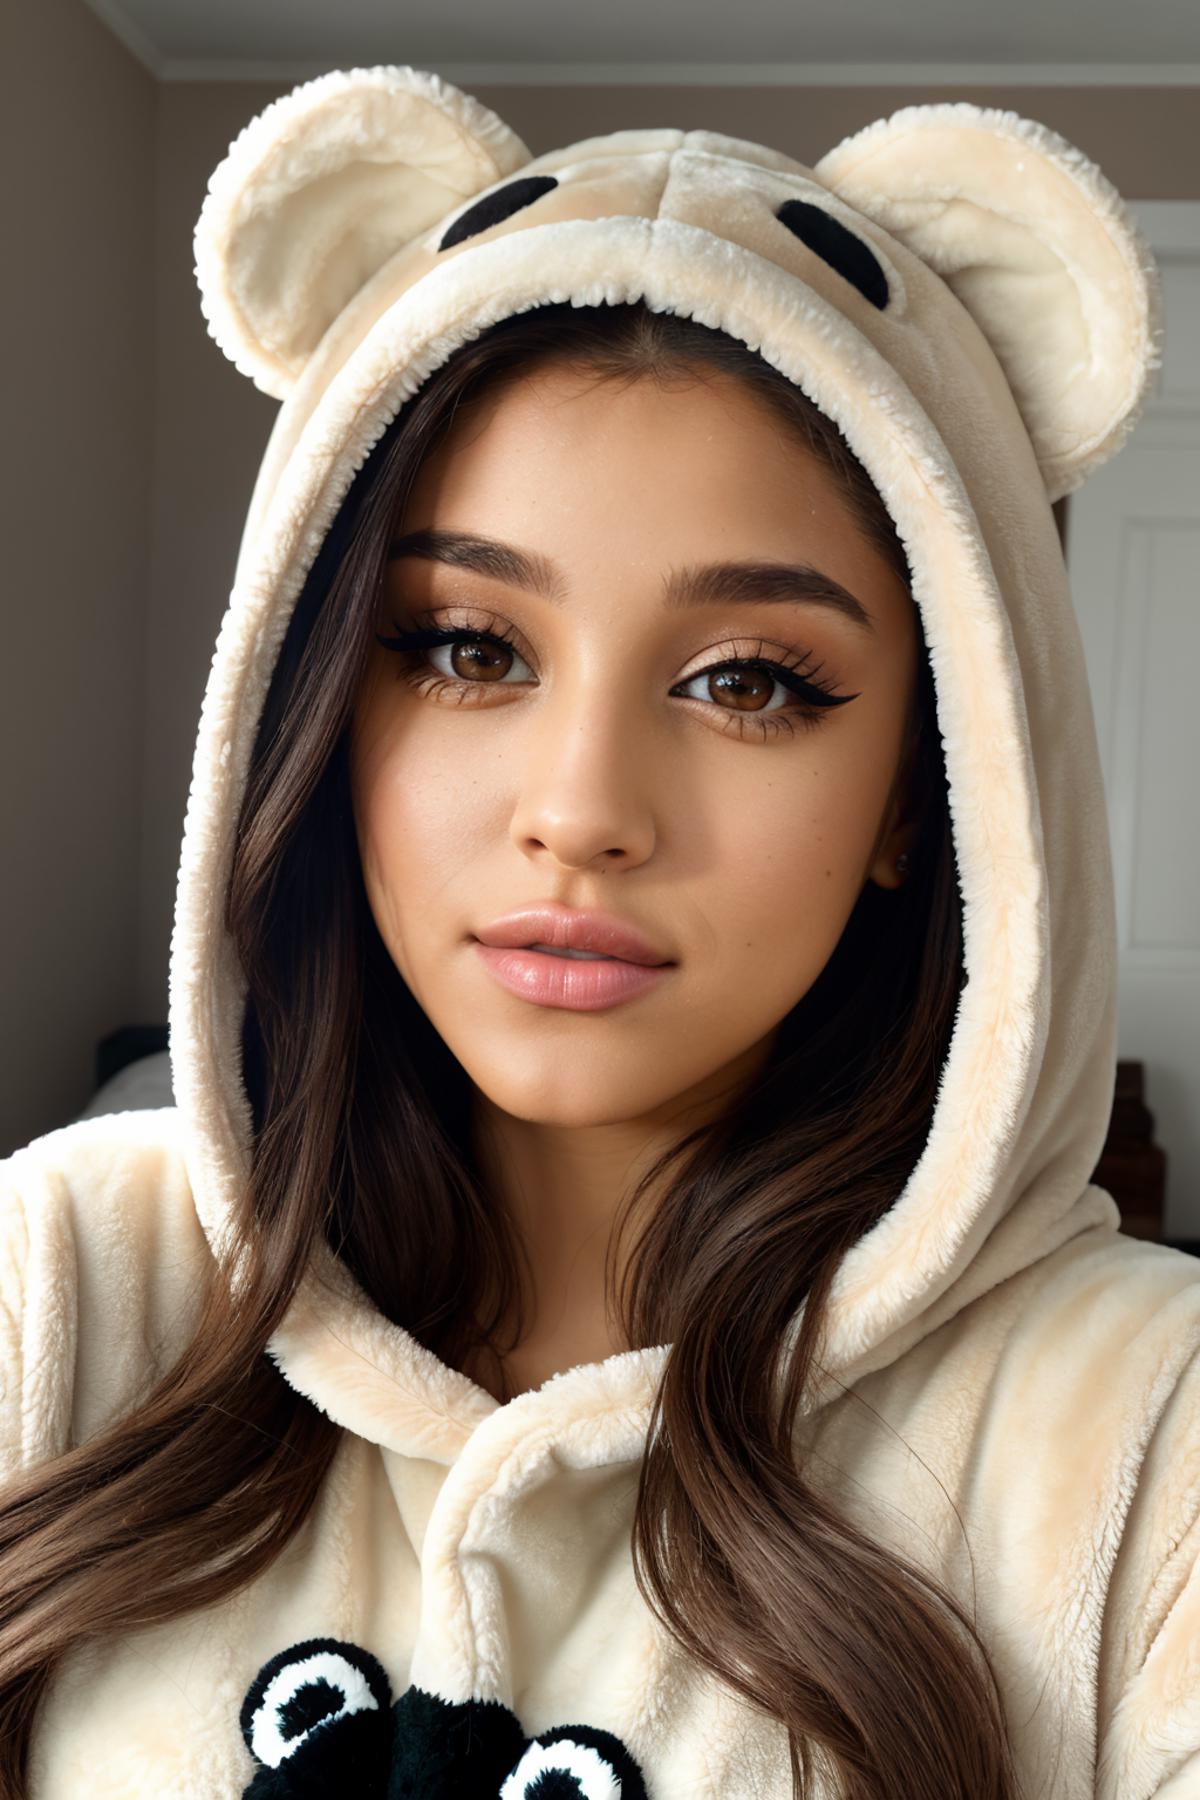 Ariana Grande image by RubberDuckie